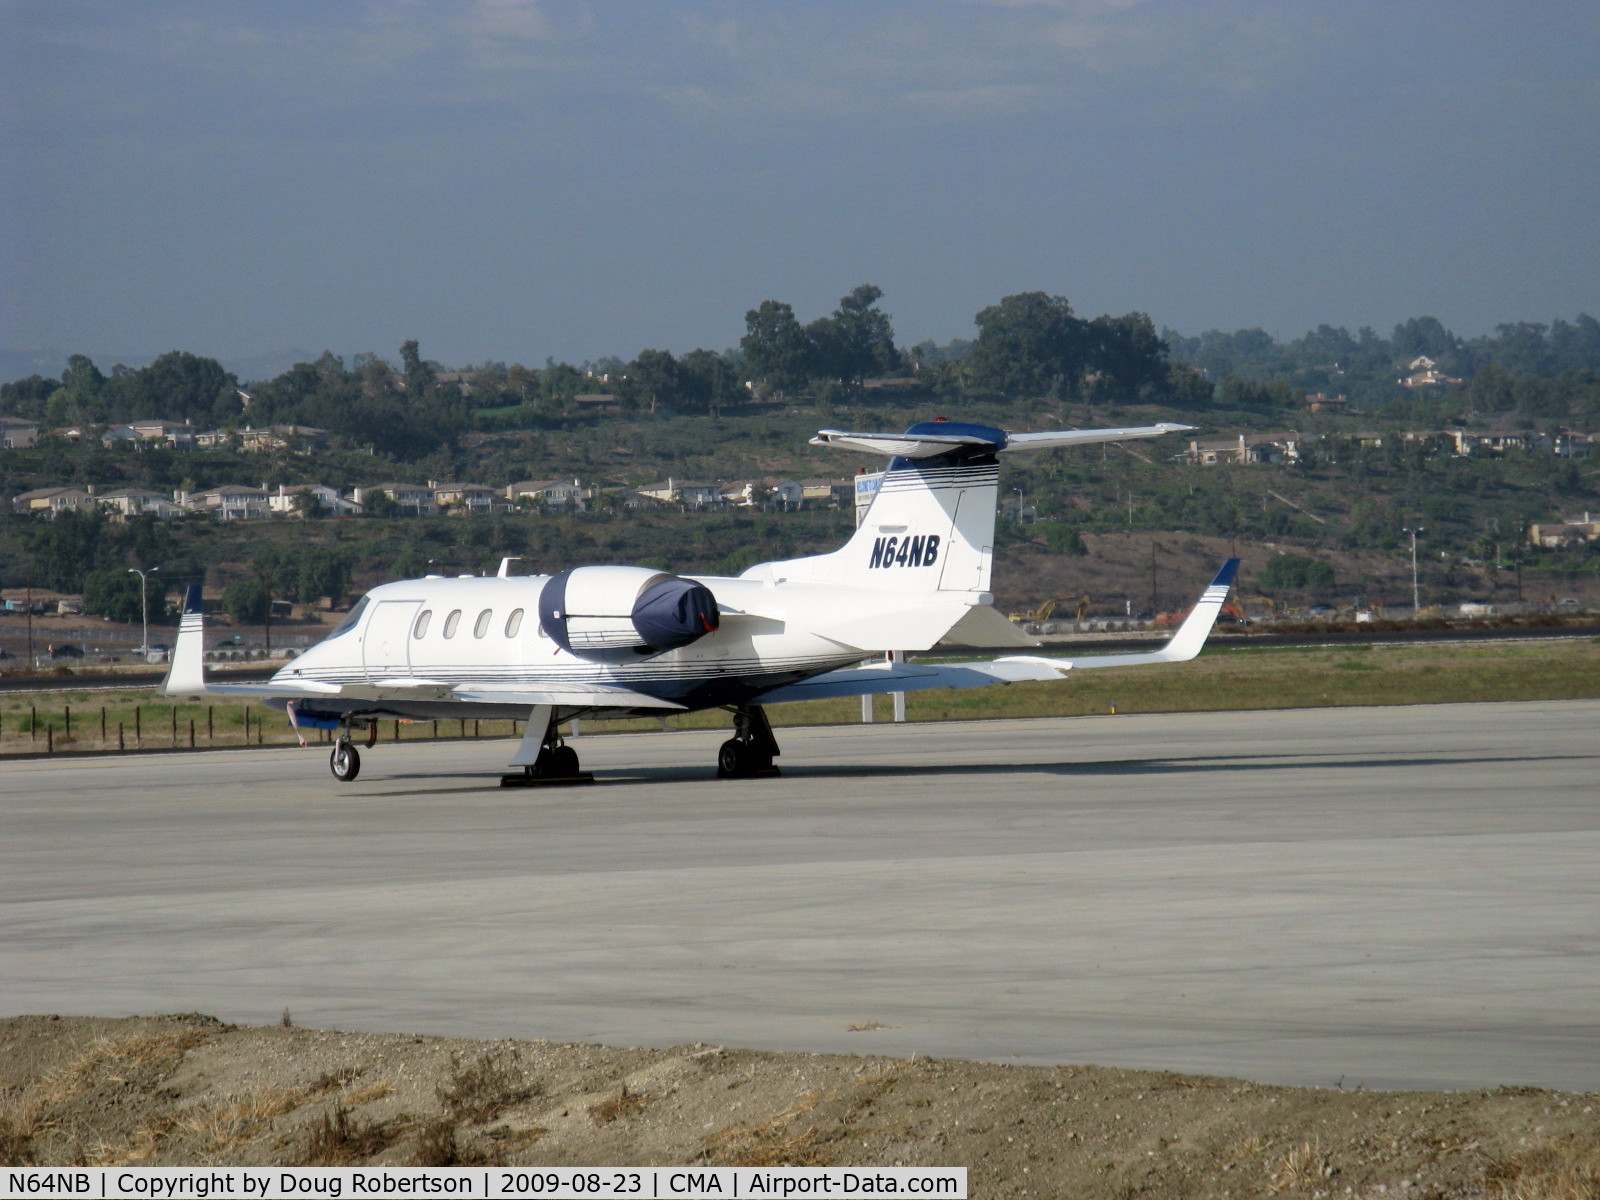 N64NB, 1992 Learjet 31A C/N 065, 1992 Learjet 31A, two Garrett TFE731-2-2B turbofans 3,500 lb st each. The 31A combines fuselage & powerplants of the 35/36 with improved wing of the 55.